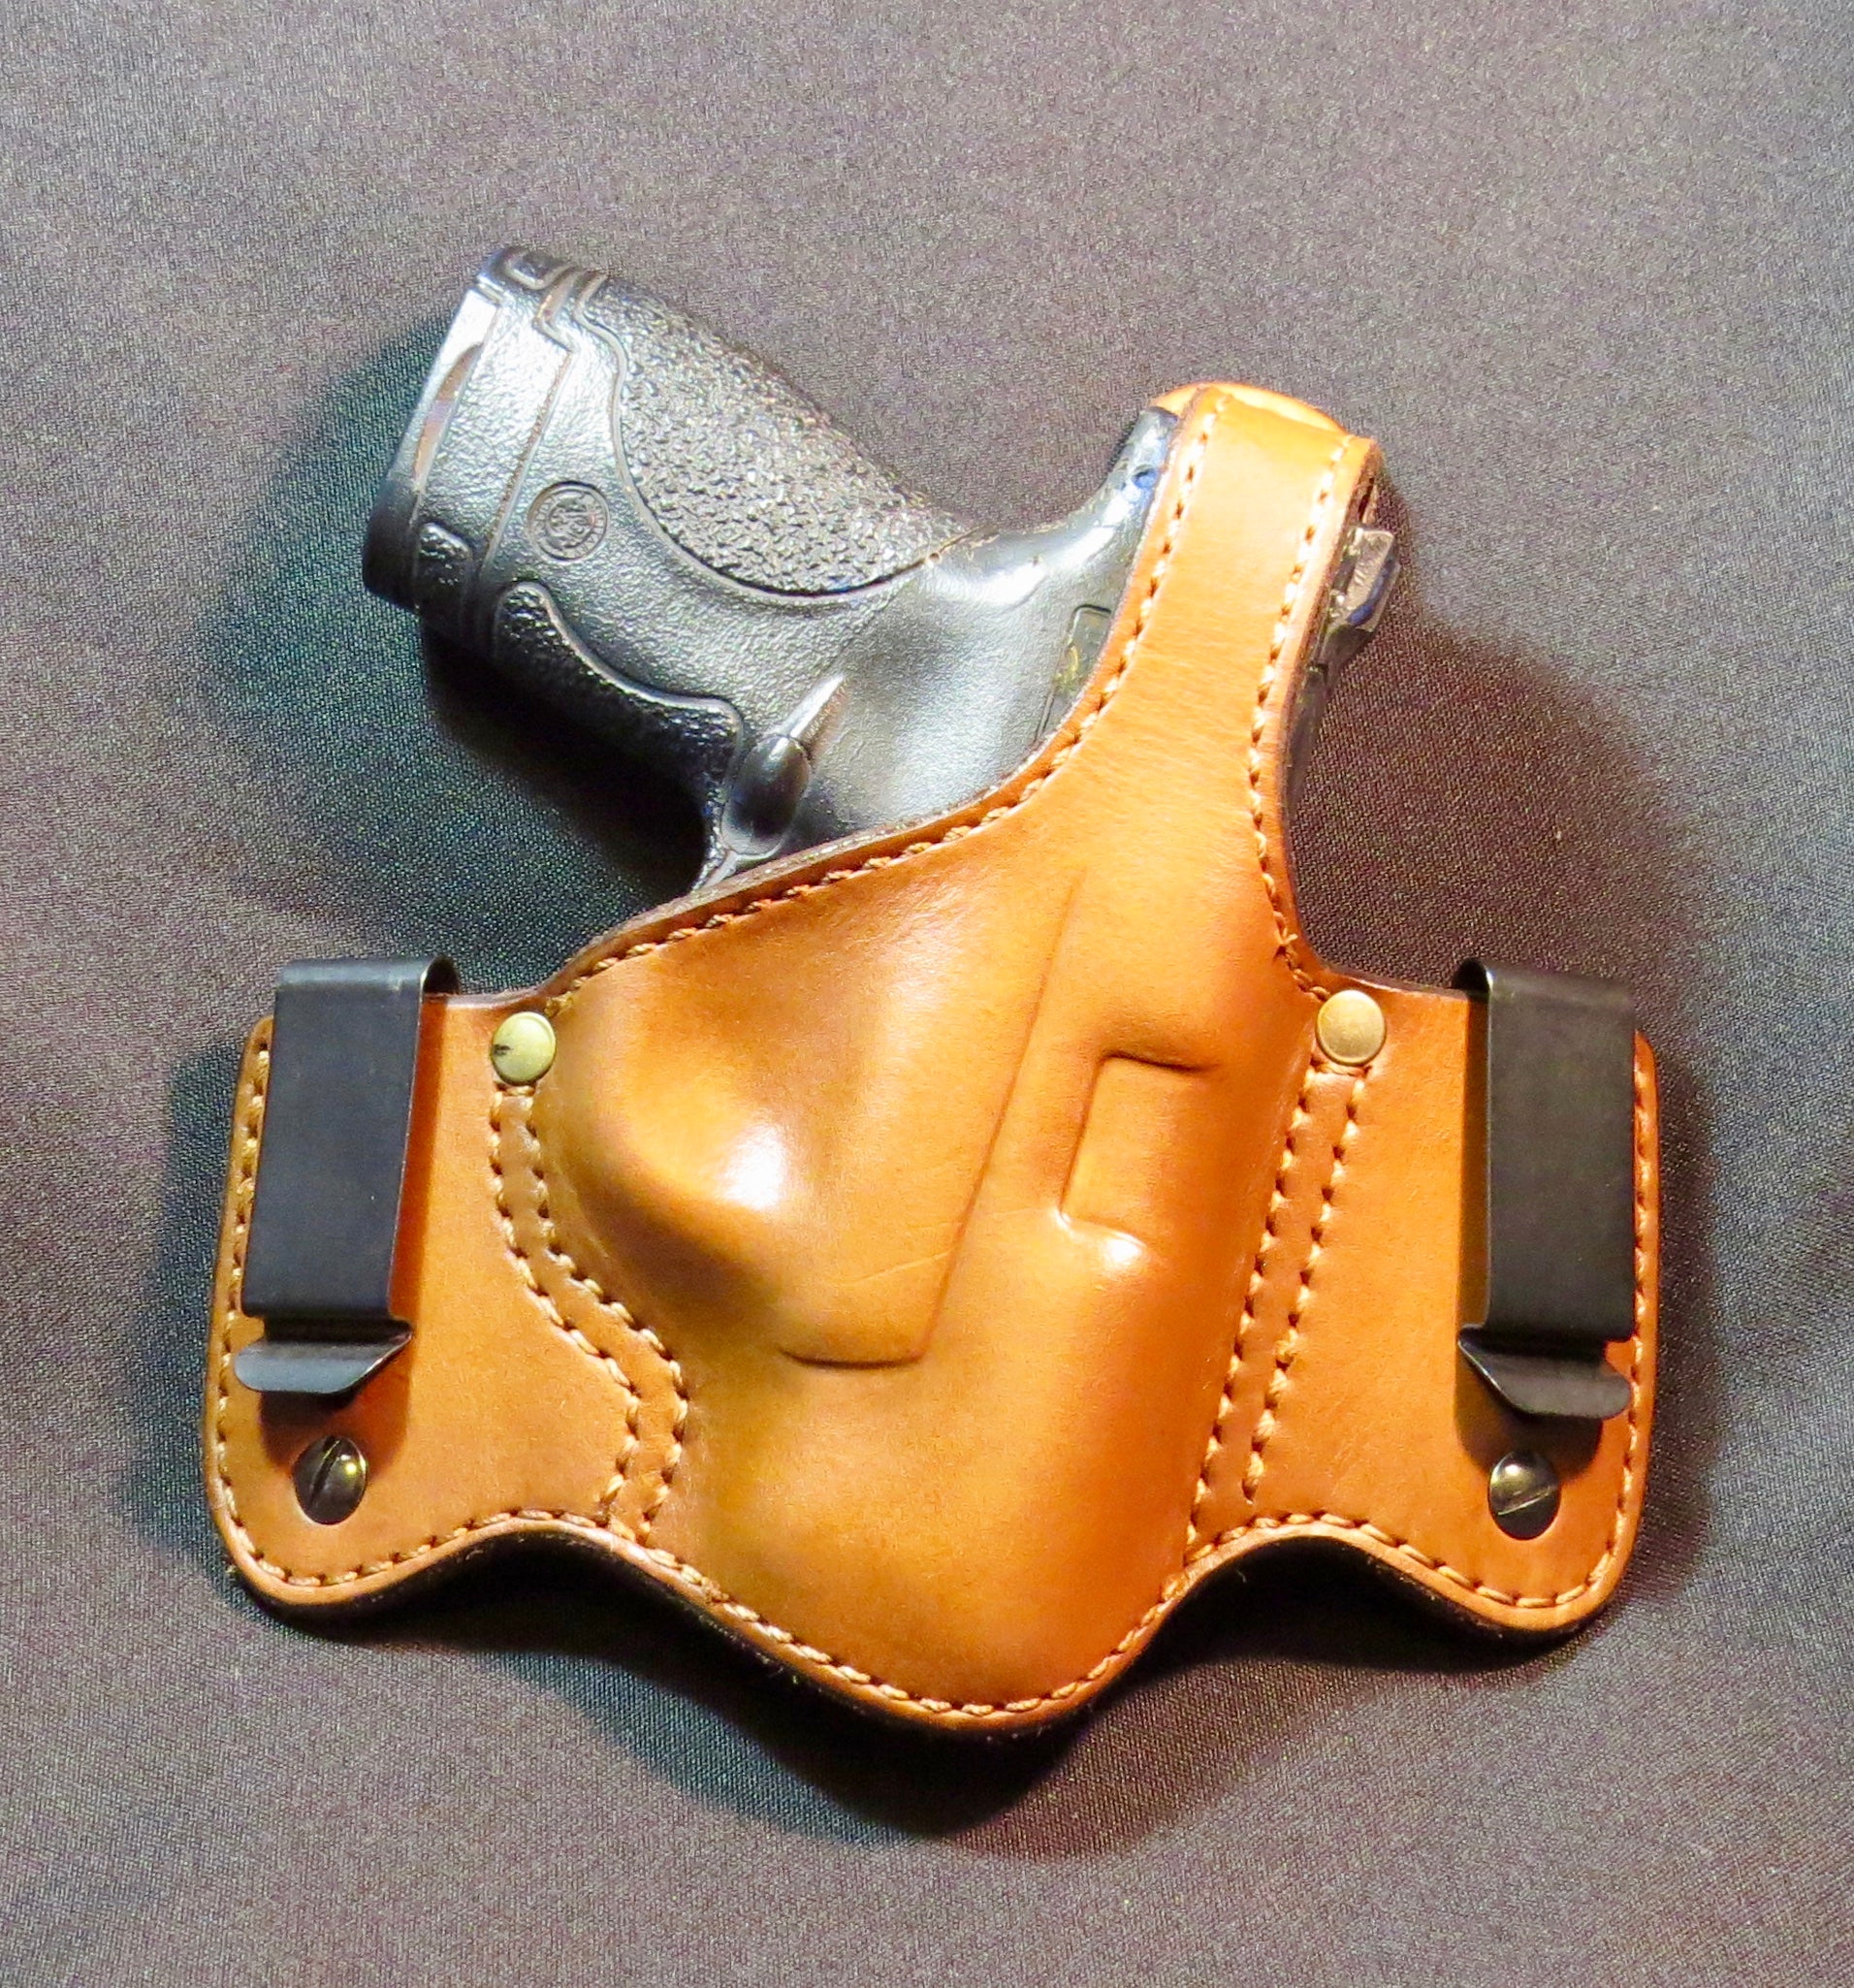 S&W M&P Sheild IWB or OWB Leather Holster with Thumb Break